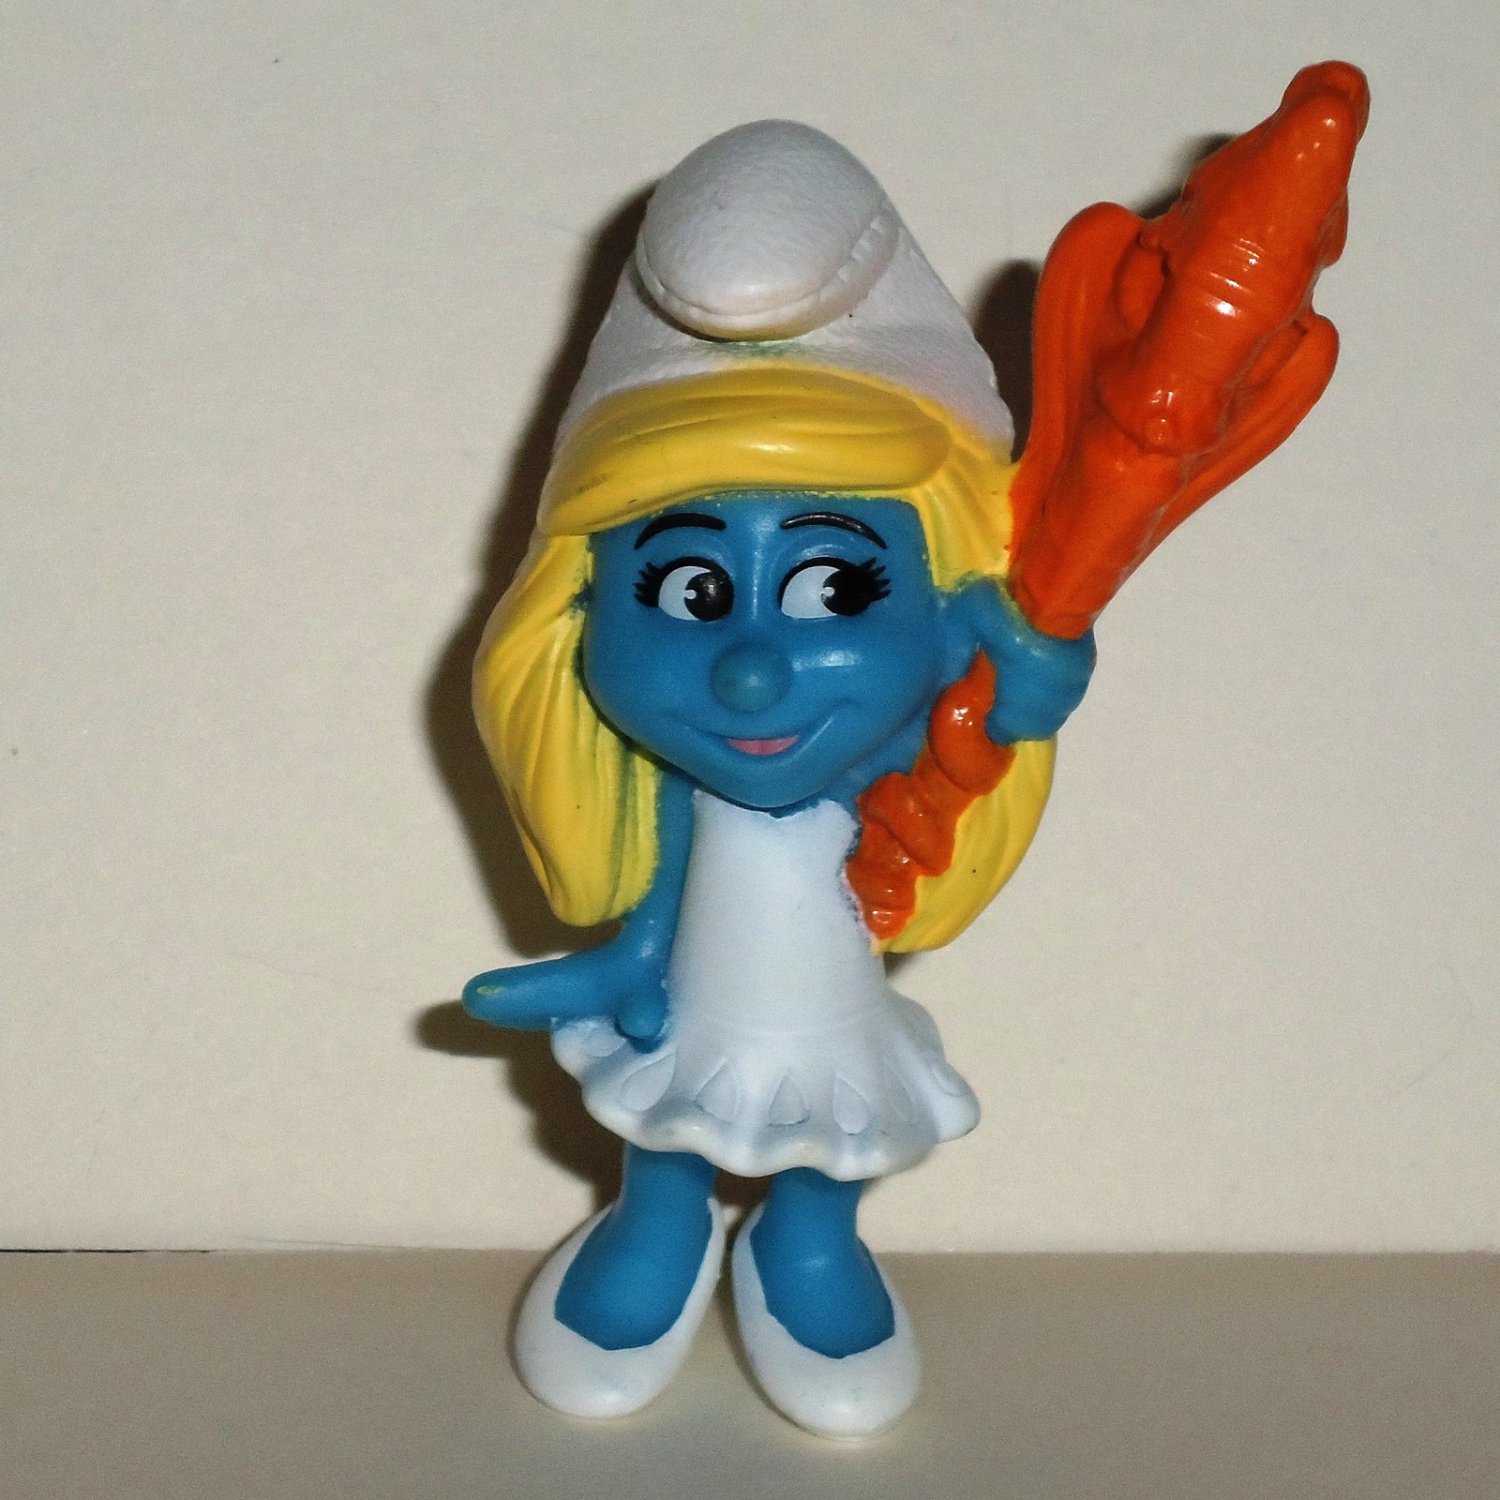 Details about   2013 McDonald's Happy Meal Toy The Smurfs 2 PVC Figure 